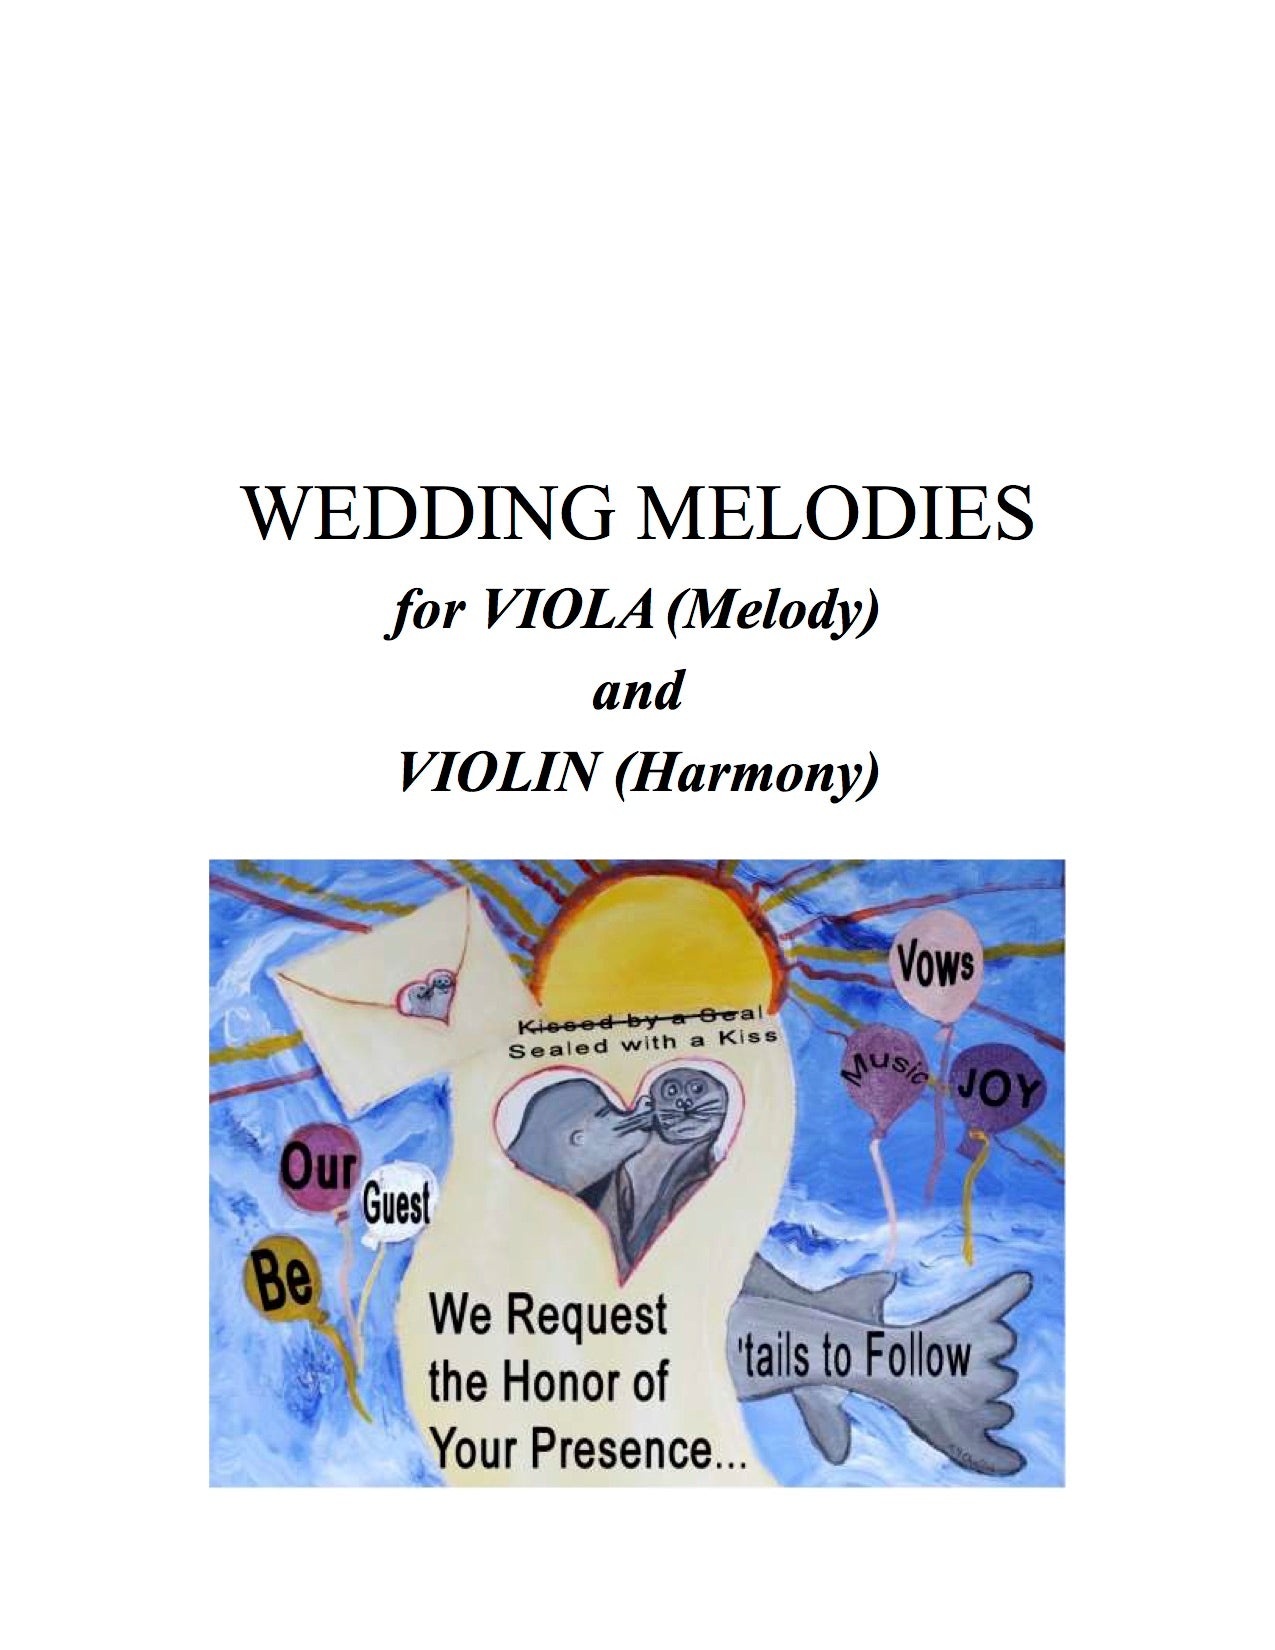 058 - Wedding Melodies for Viola (Melody) and Violin (Harmony)